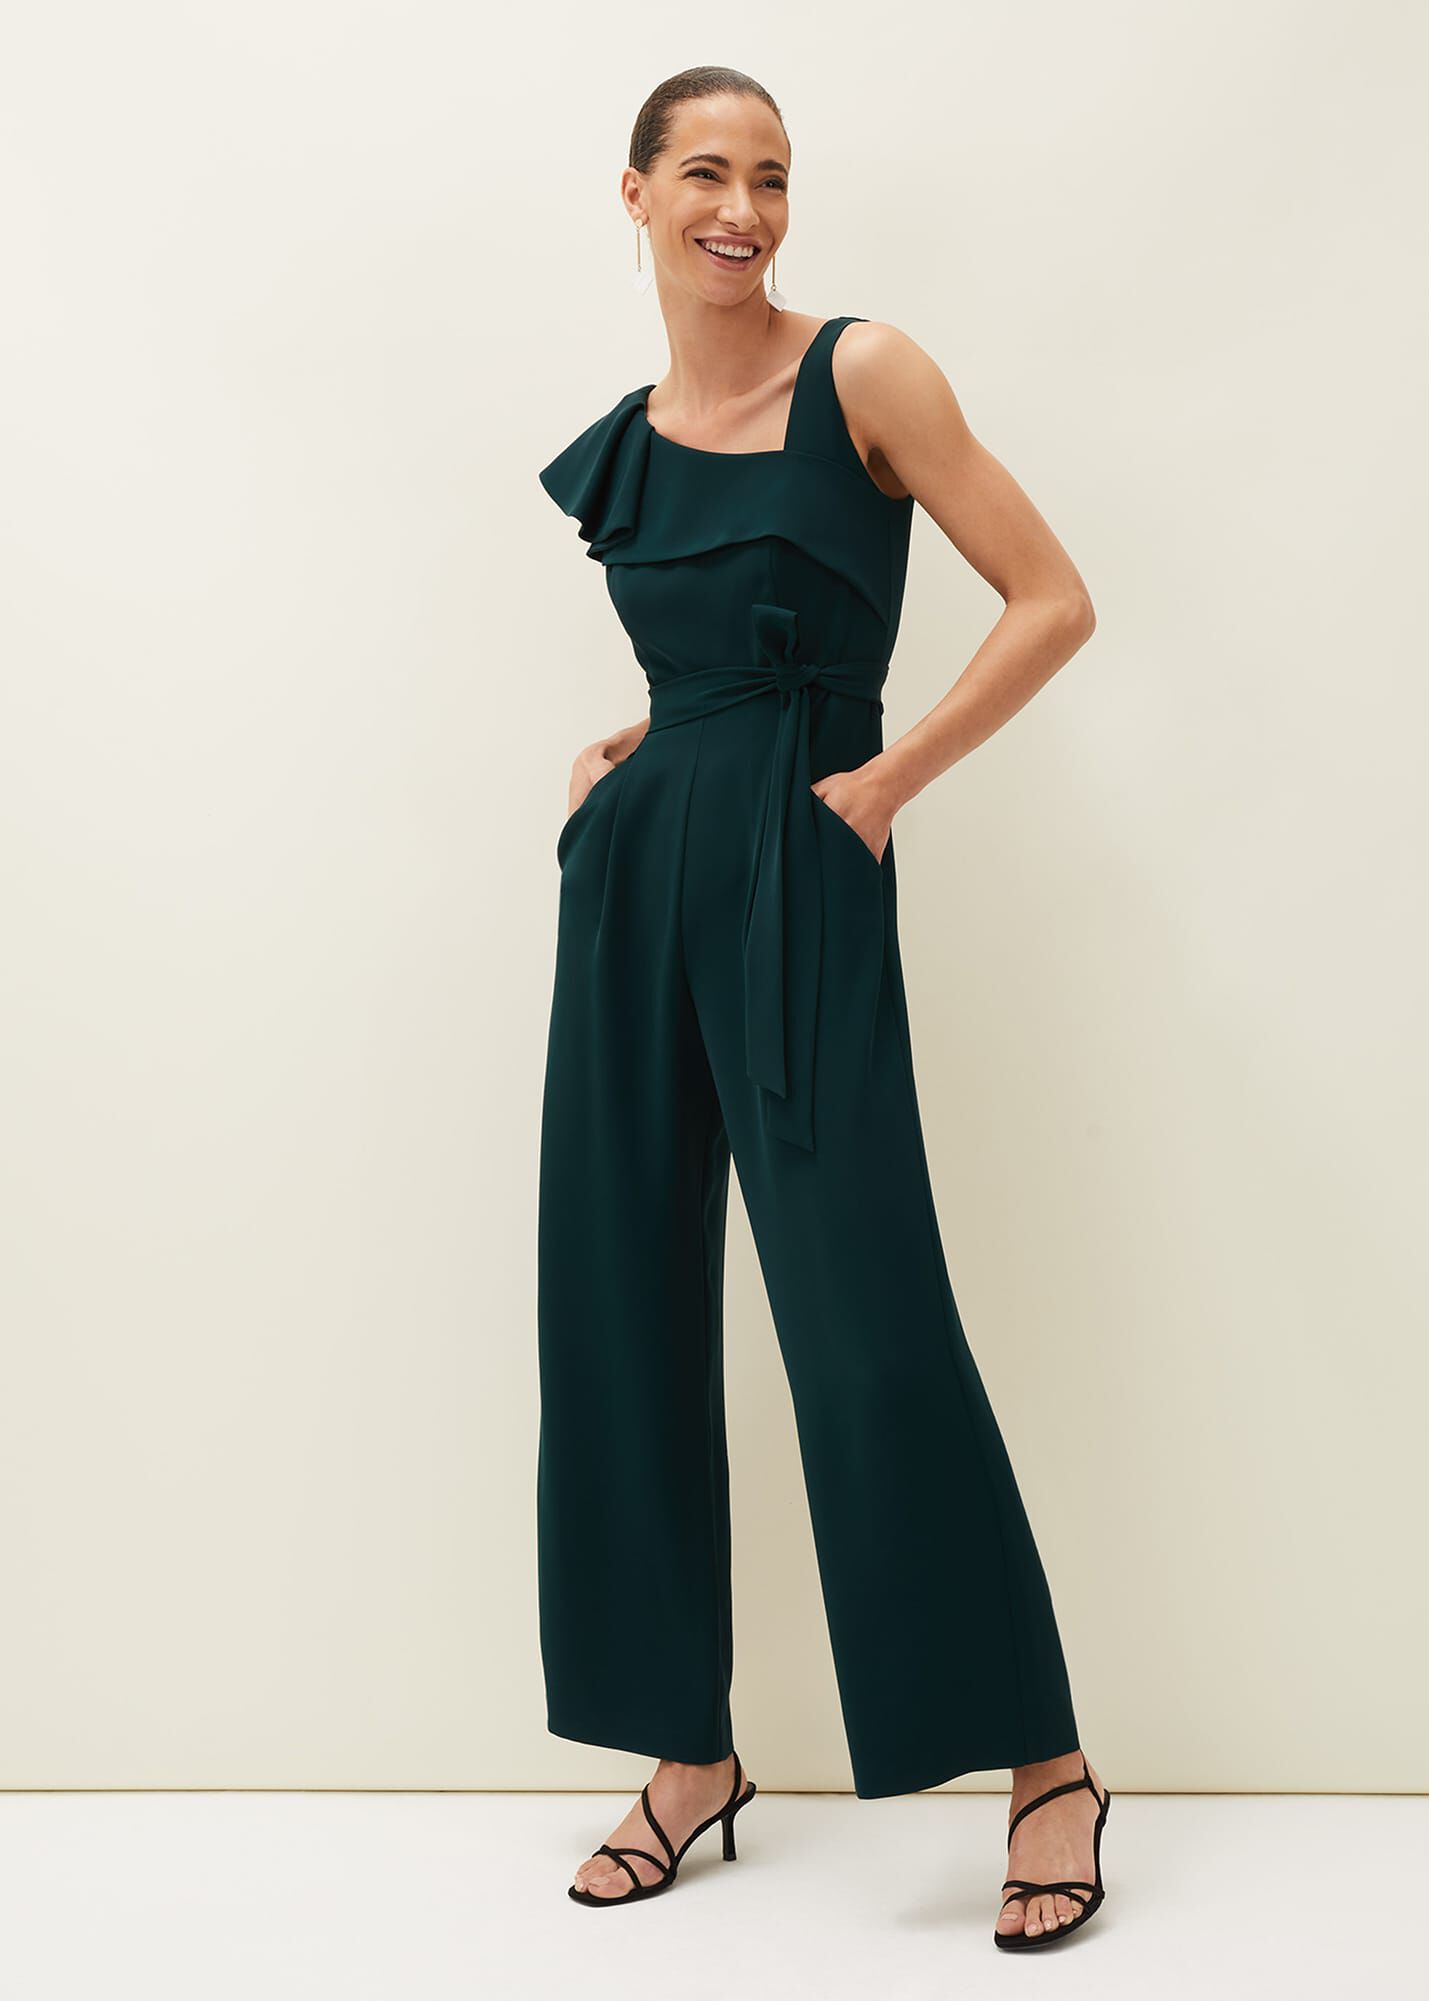 Women's Jumpsuits | Evening & Casual Jumpsuits | Phase Eight 